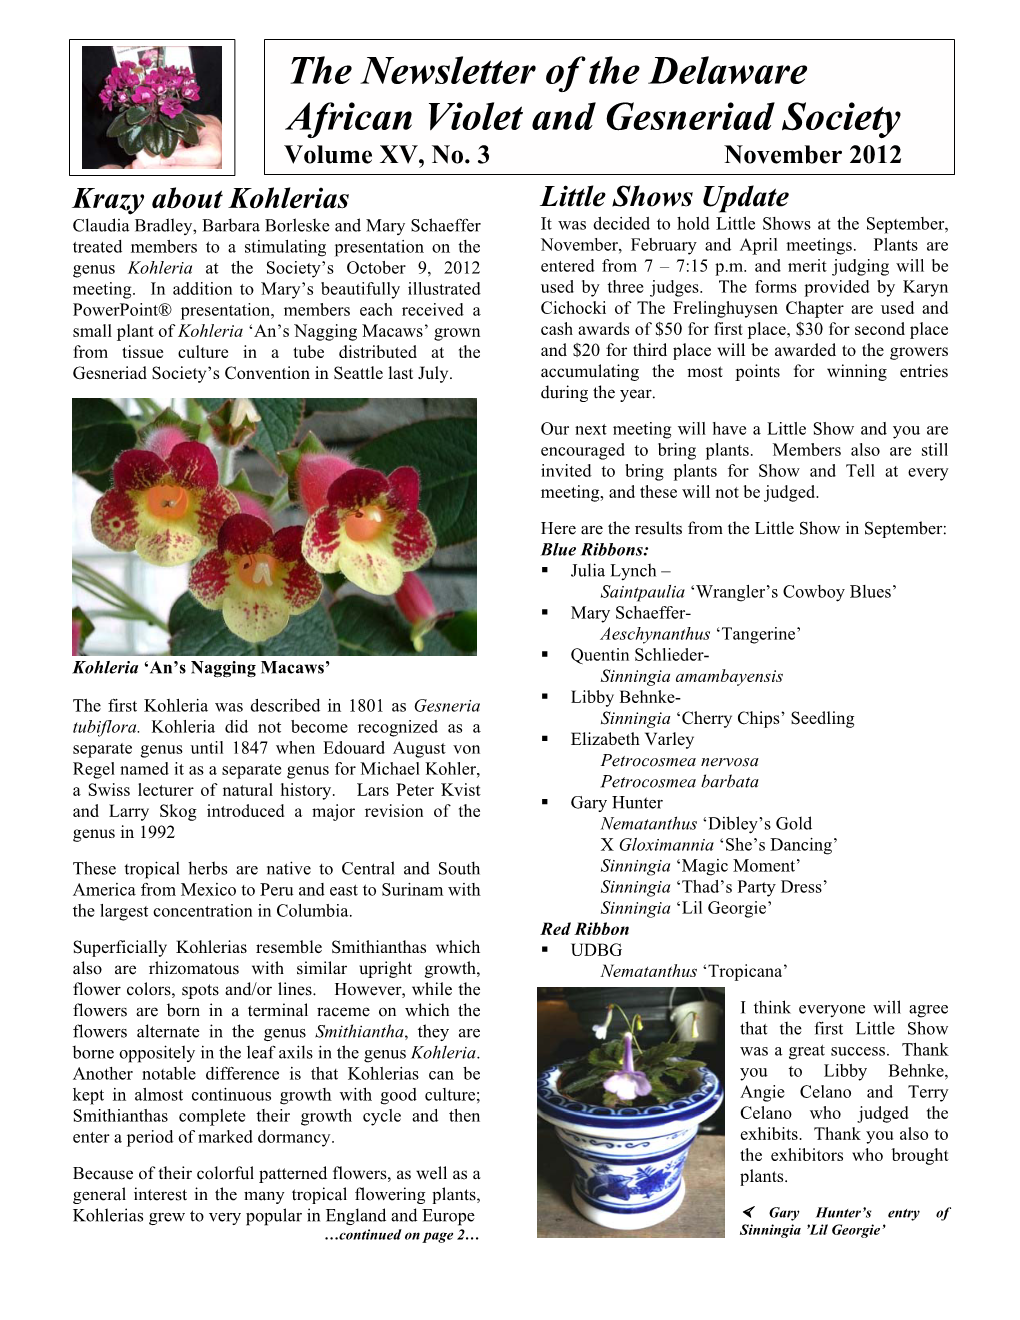 The Newsletter of the Delaware African Violet and Gesneriad Society